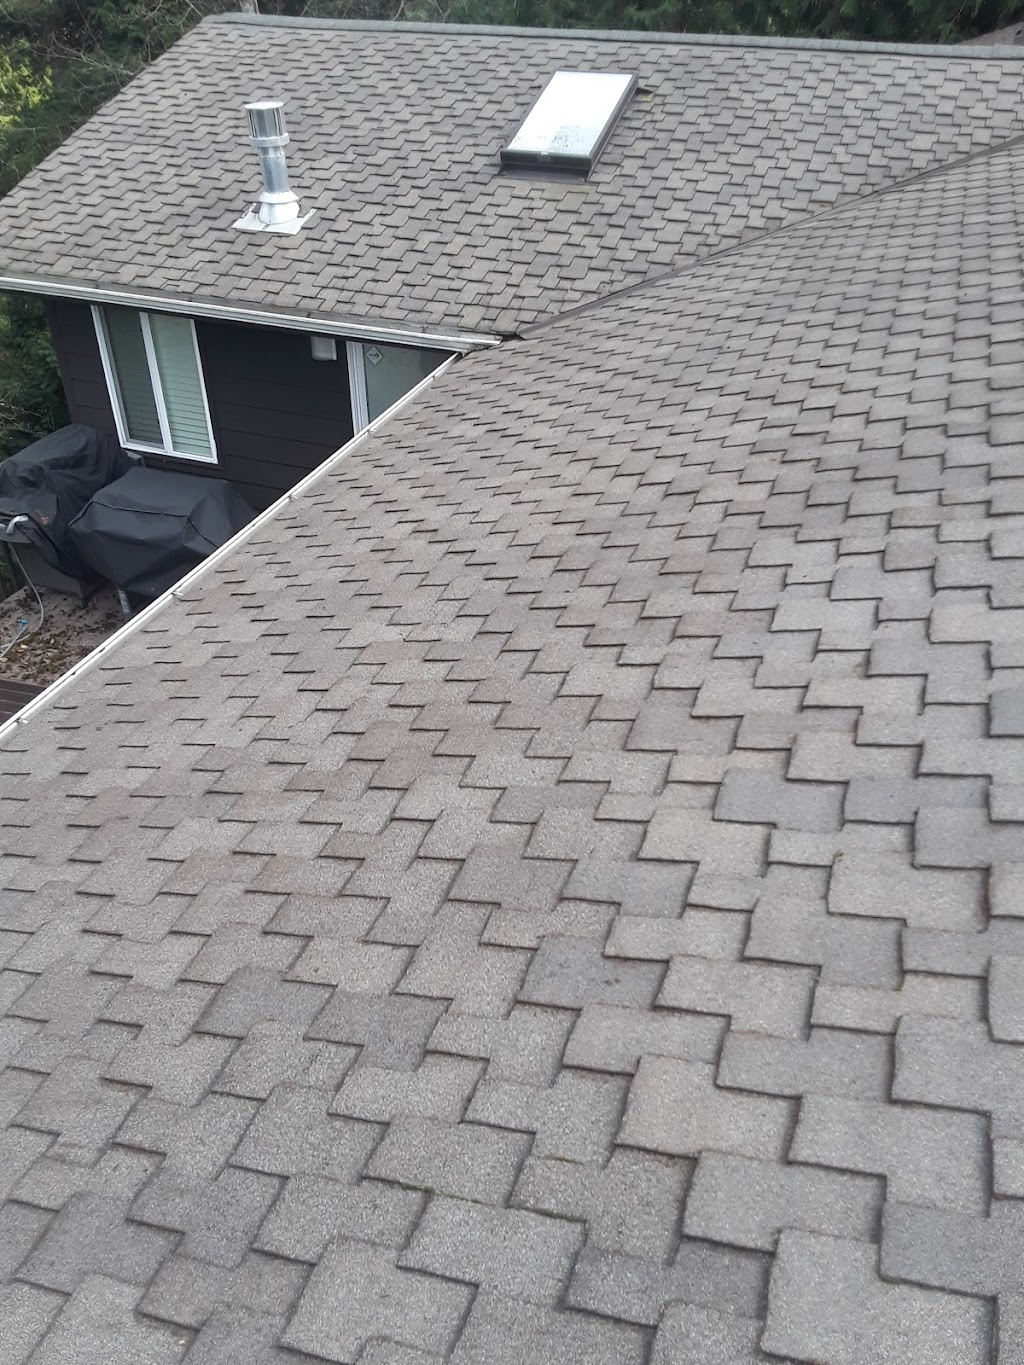 All Access Roofing & Gutters - roofing contractor  | Photo 3 of 10 | Address: 1626 175th Pl SE, Bothell, WA 98012, USA | Phone: (206) 775-0246